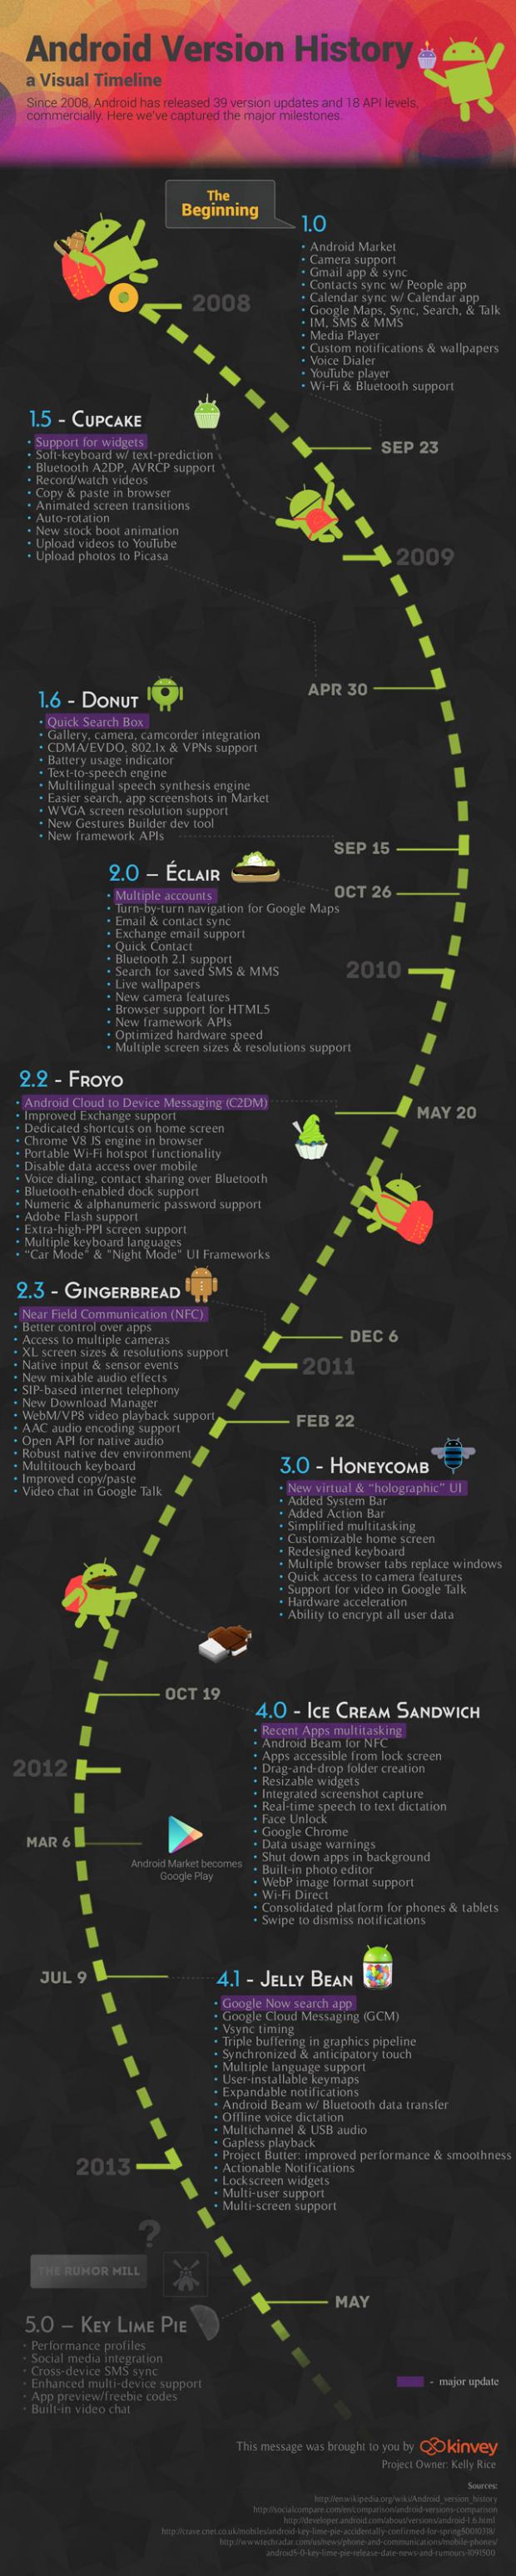 android-history-infographic-640_0